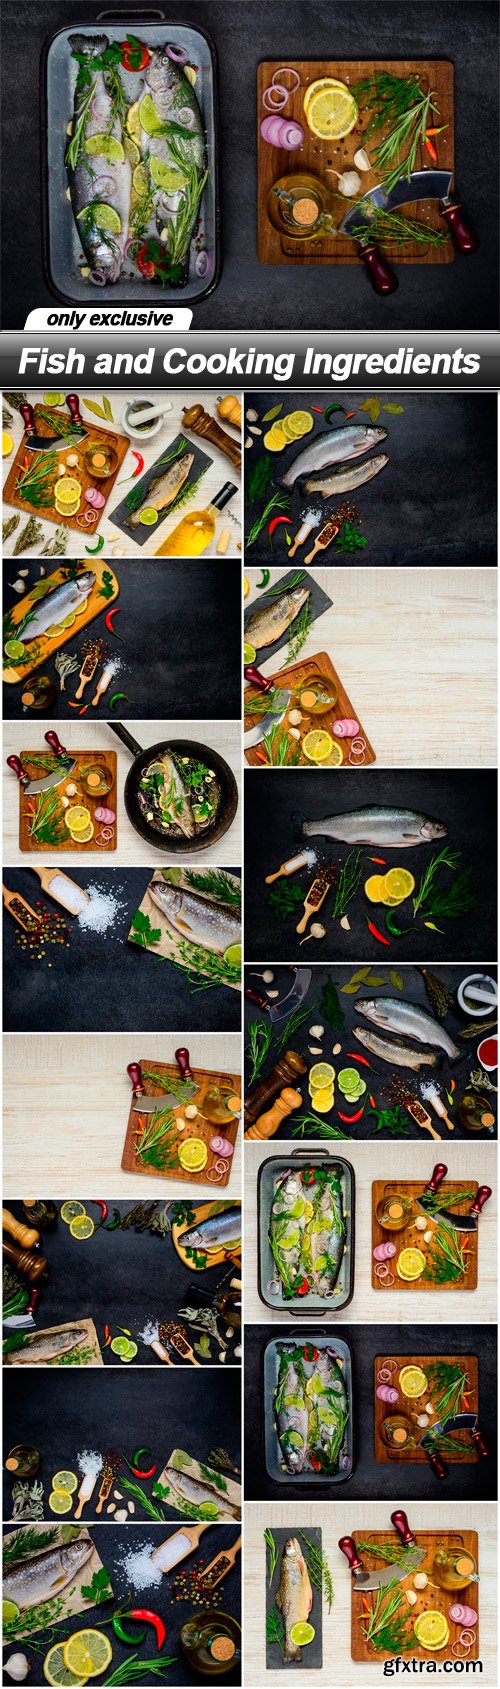 Fish and Cooking Ingredients - 15 UHQ JPEG